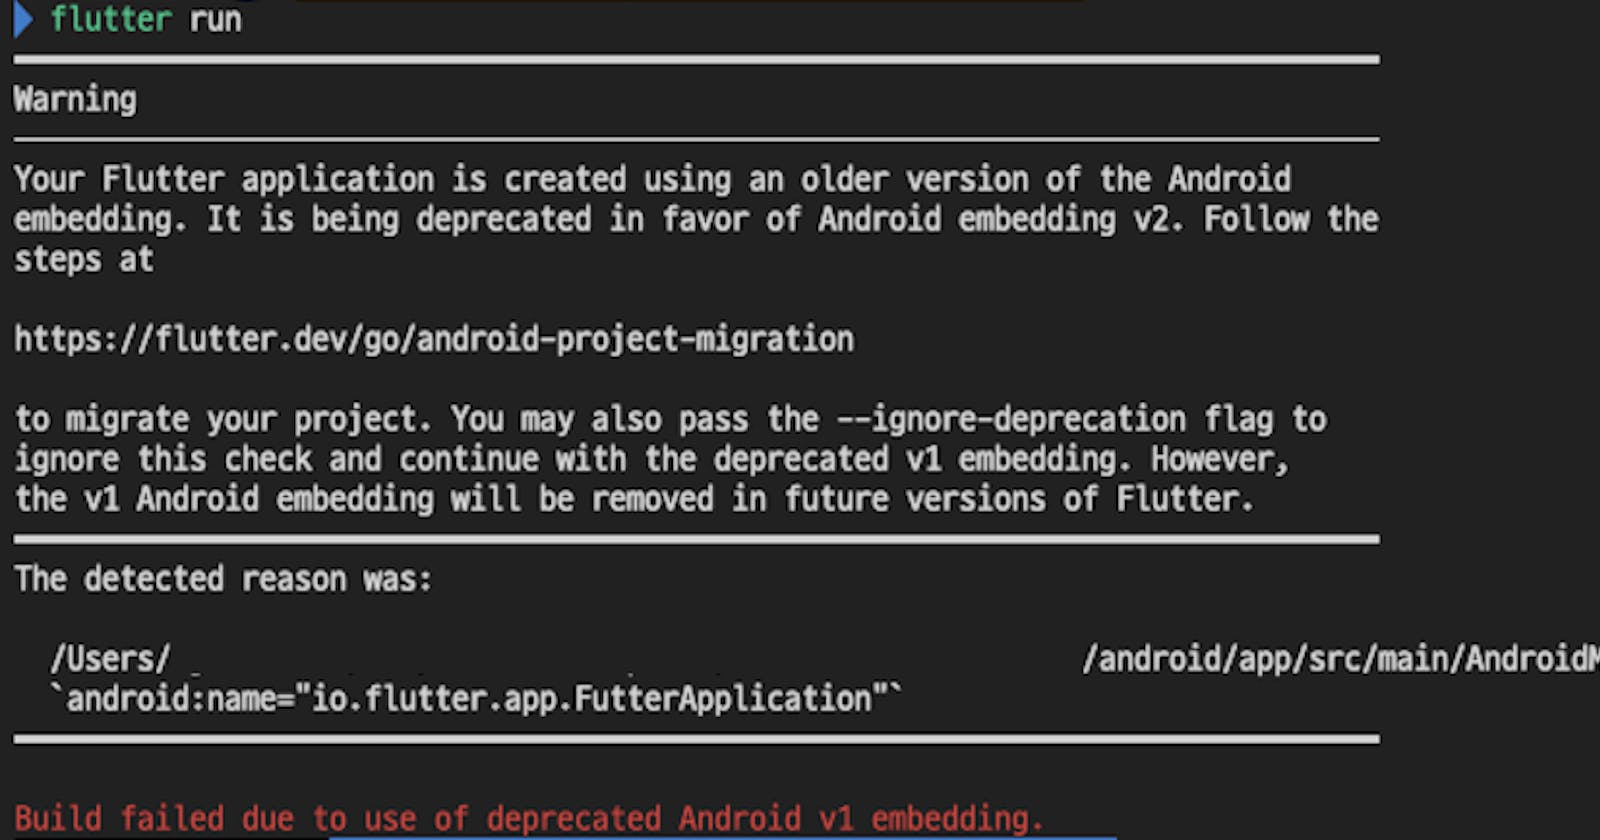 Your Flutter application is created using an older version of the Android embedding